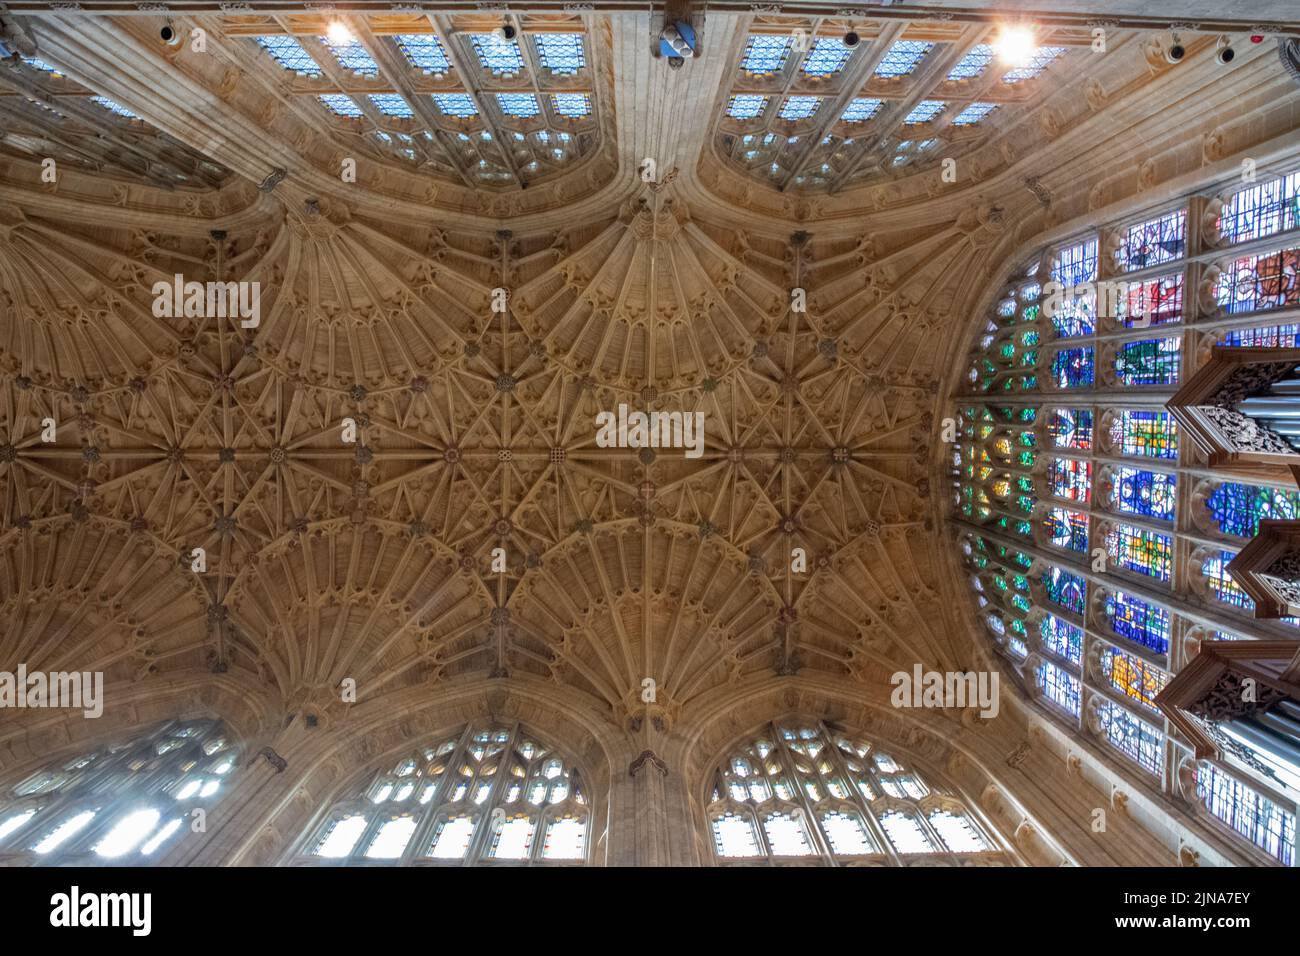 The nave vaulting Sherborne Abbey, Dorset Stock Photo